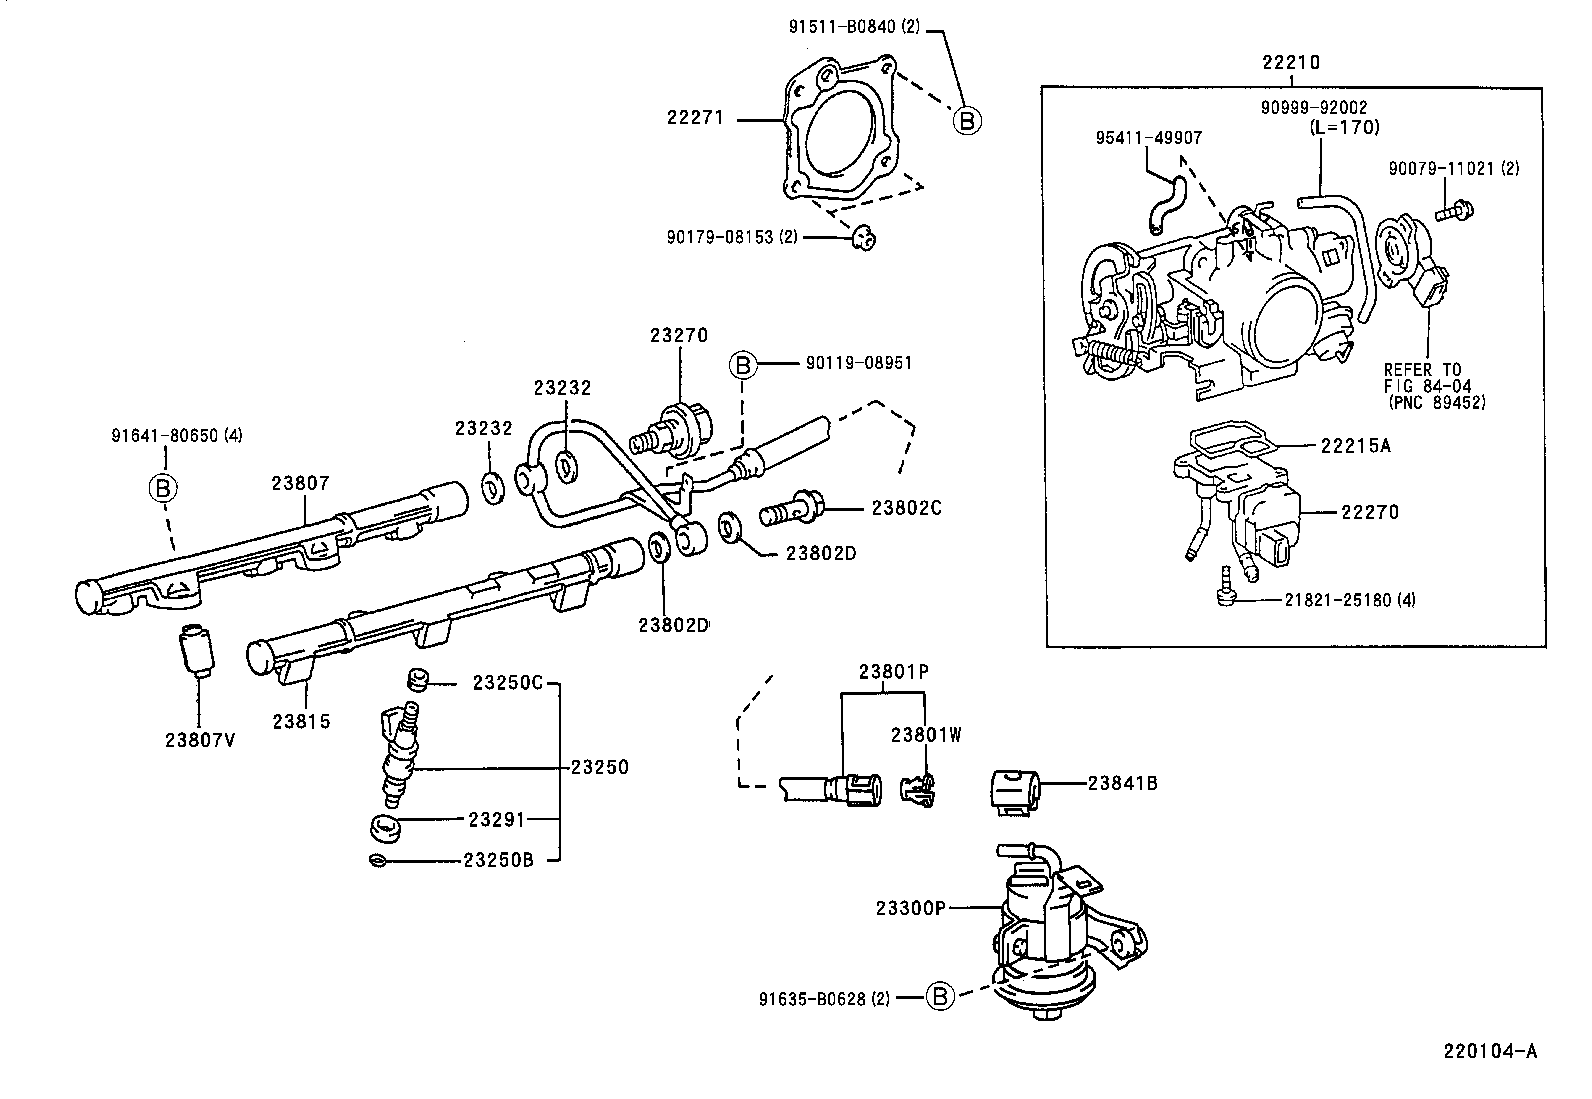  ES300 |  FUEL INJECTION SYSTEM